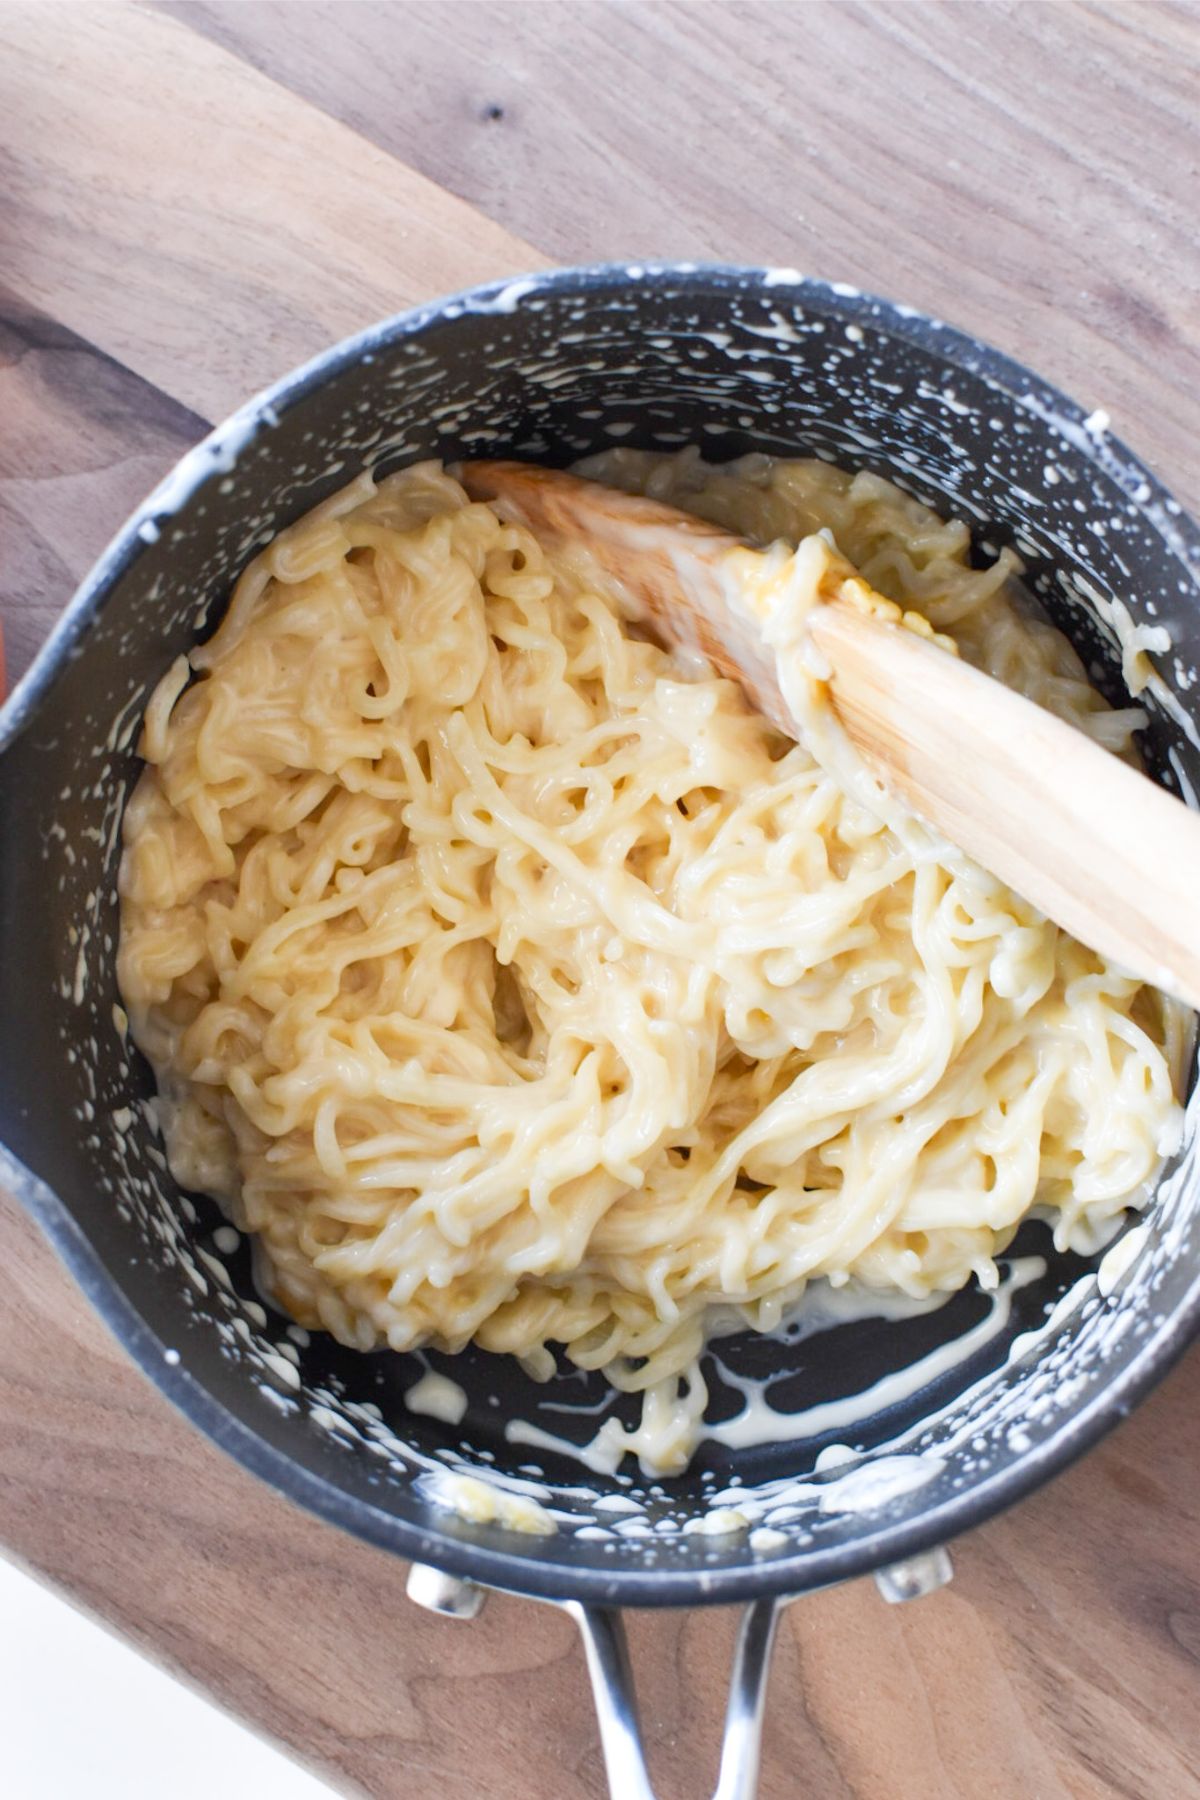 Cheesy ramen being stirred in a pot to allow the cheese to melt.